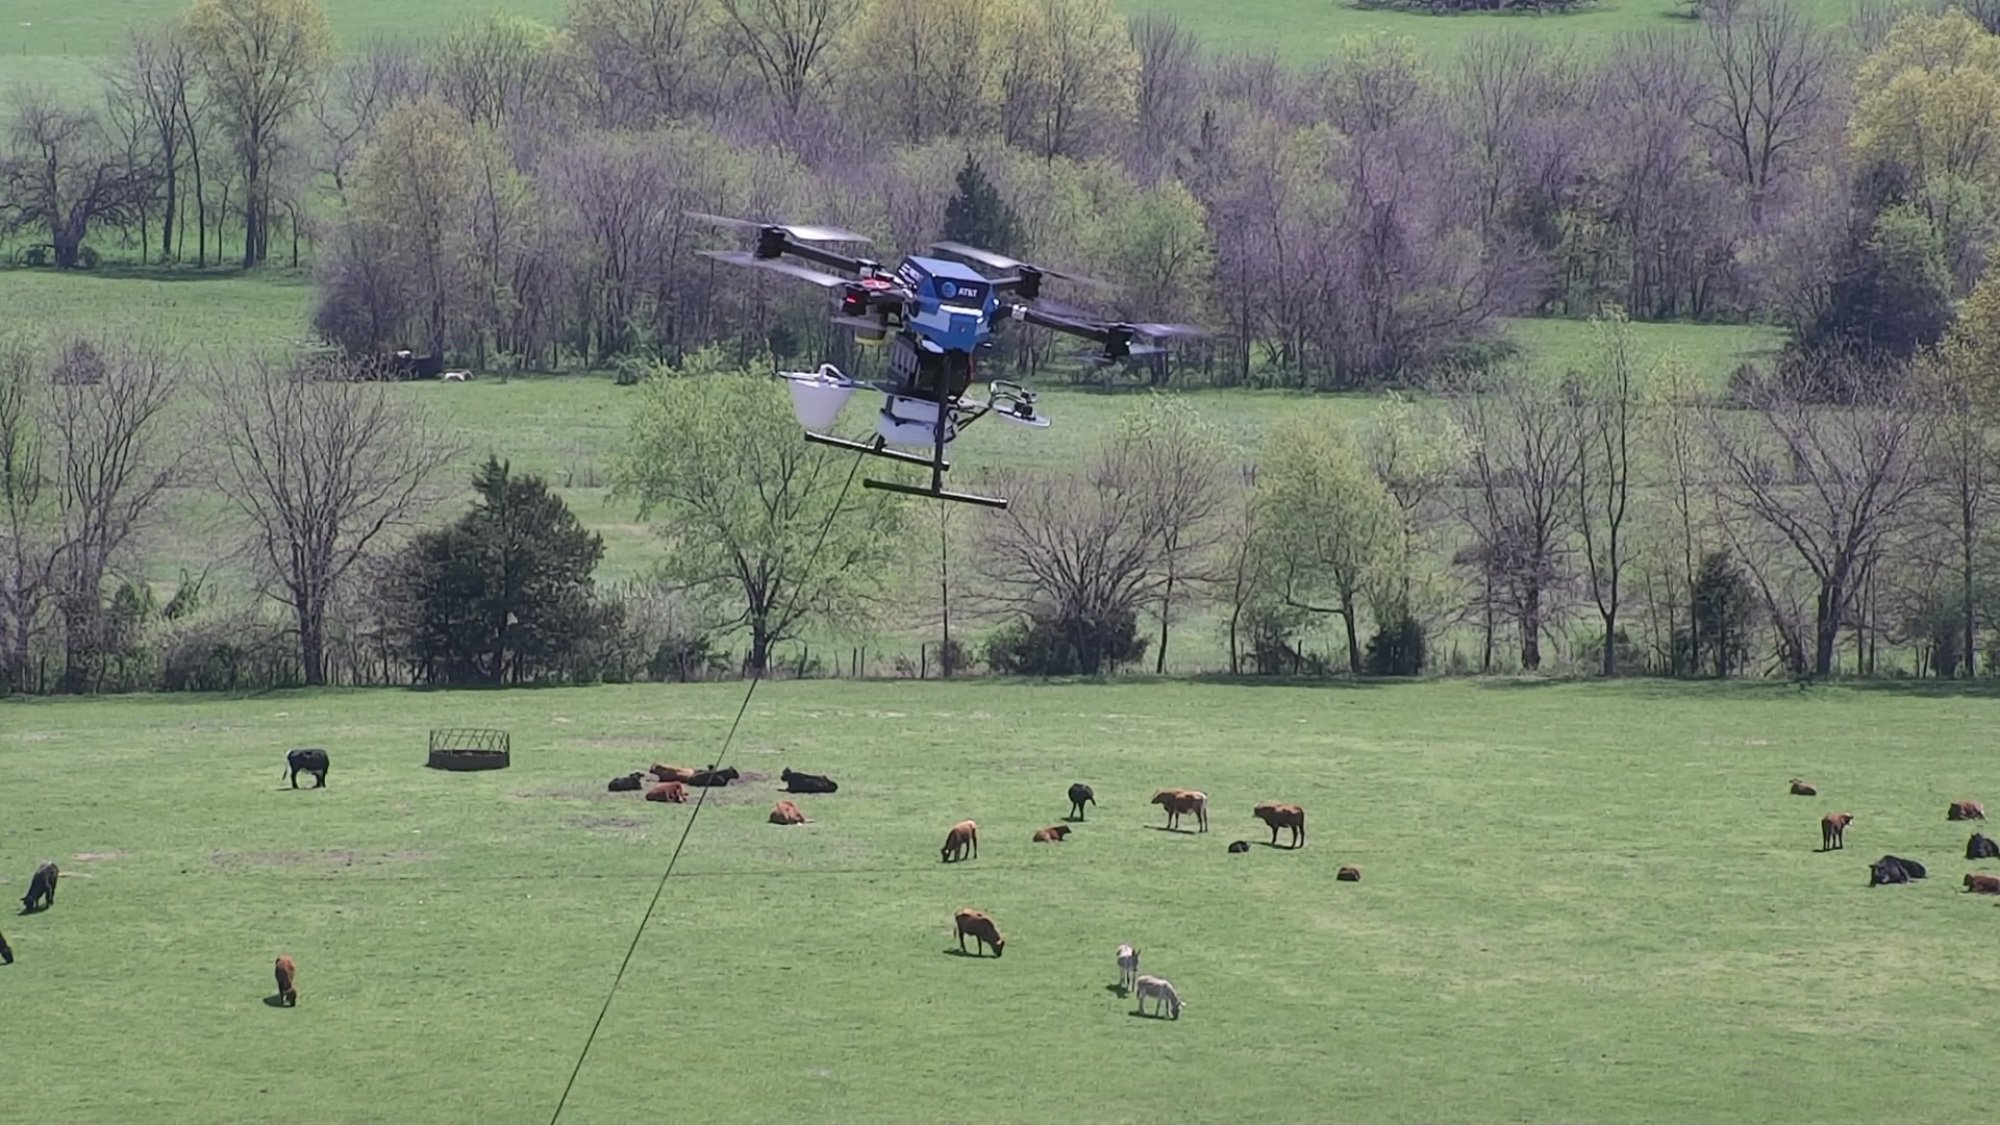 Image of AT&T 5G drone flying over a field of cows